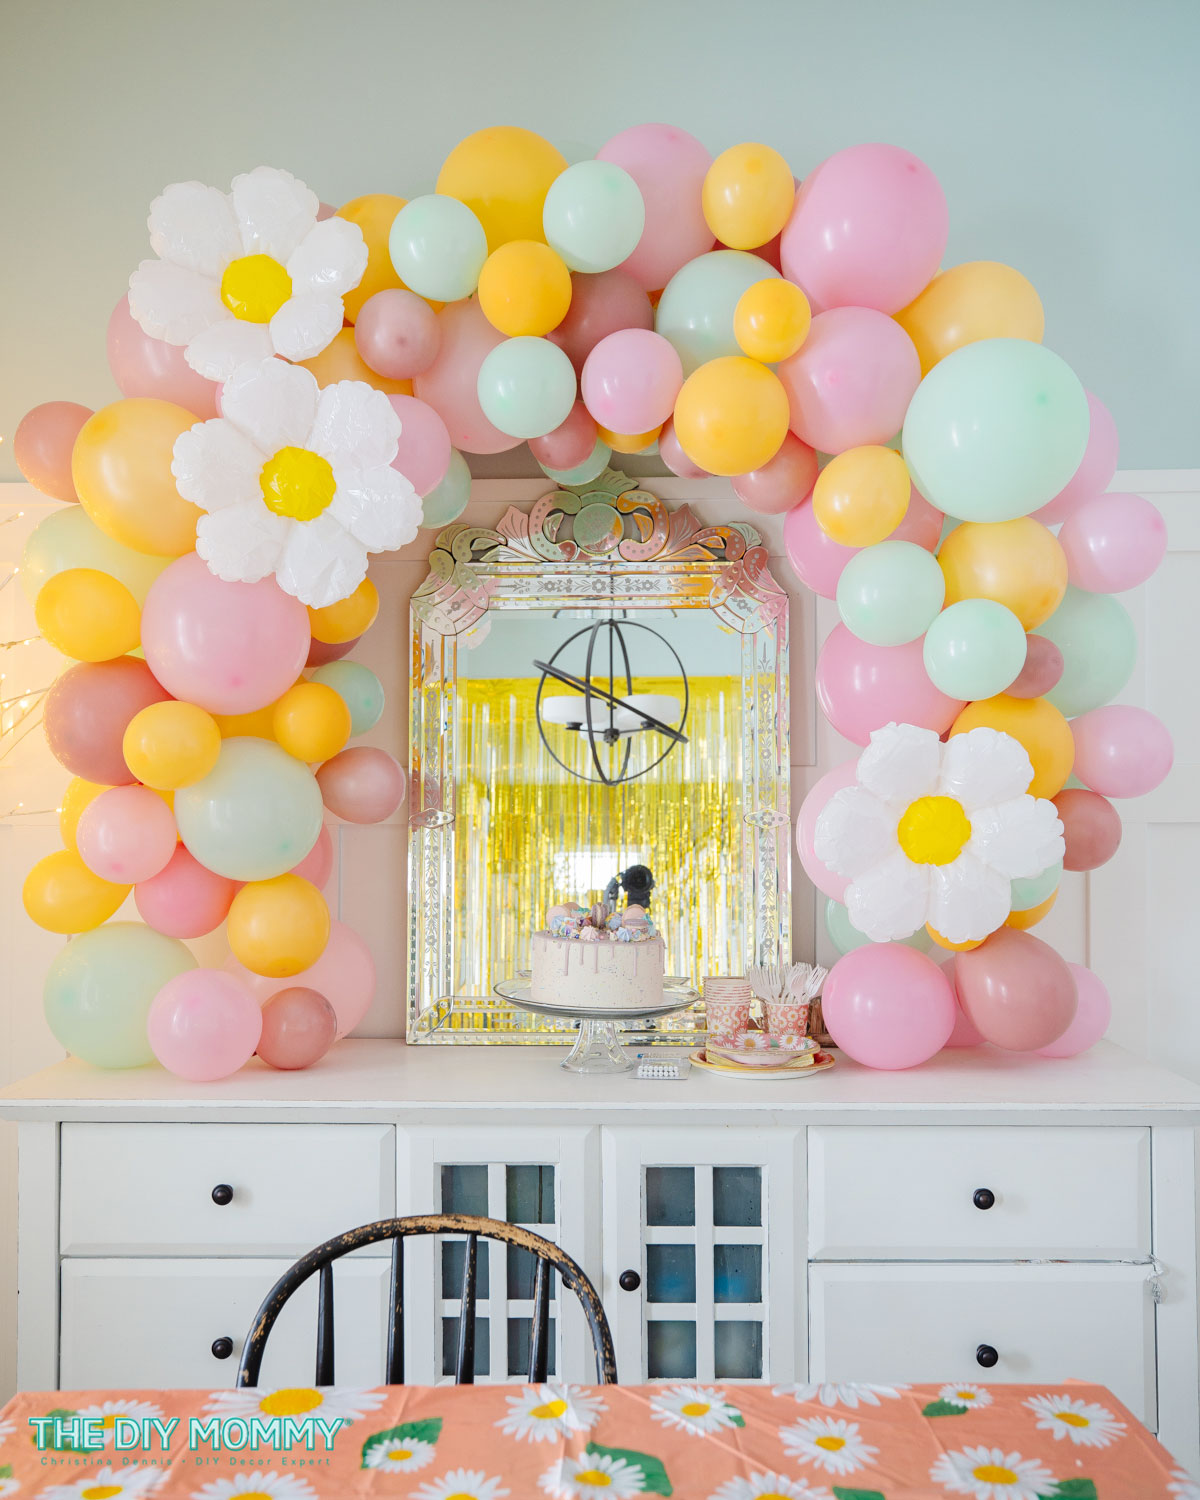 How to Make a Homemade Balloon Arch (Seriously Easy!)